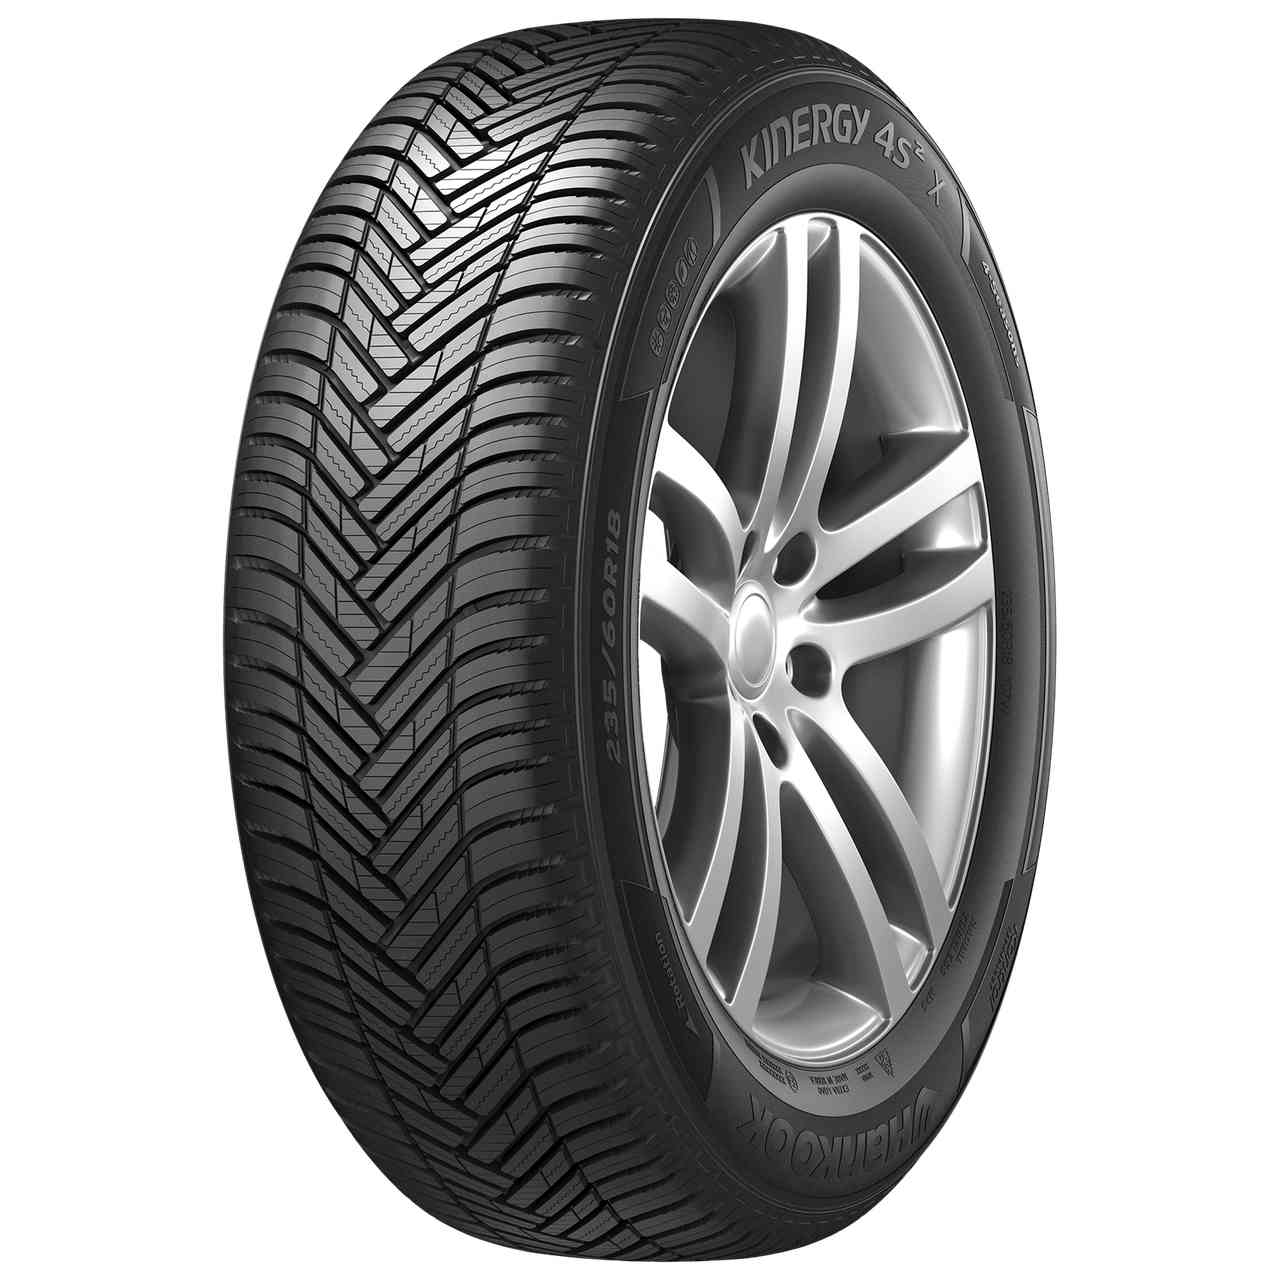 HANKOOK KINERGY 4S 2 X (H750A) 225/65R17 106H BSW XL